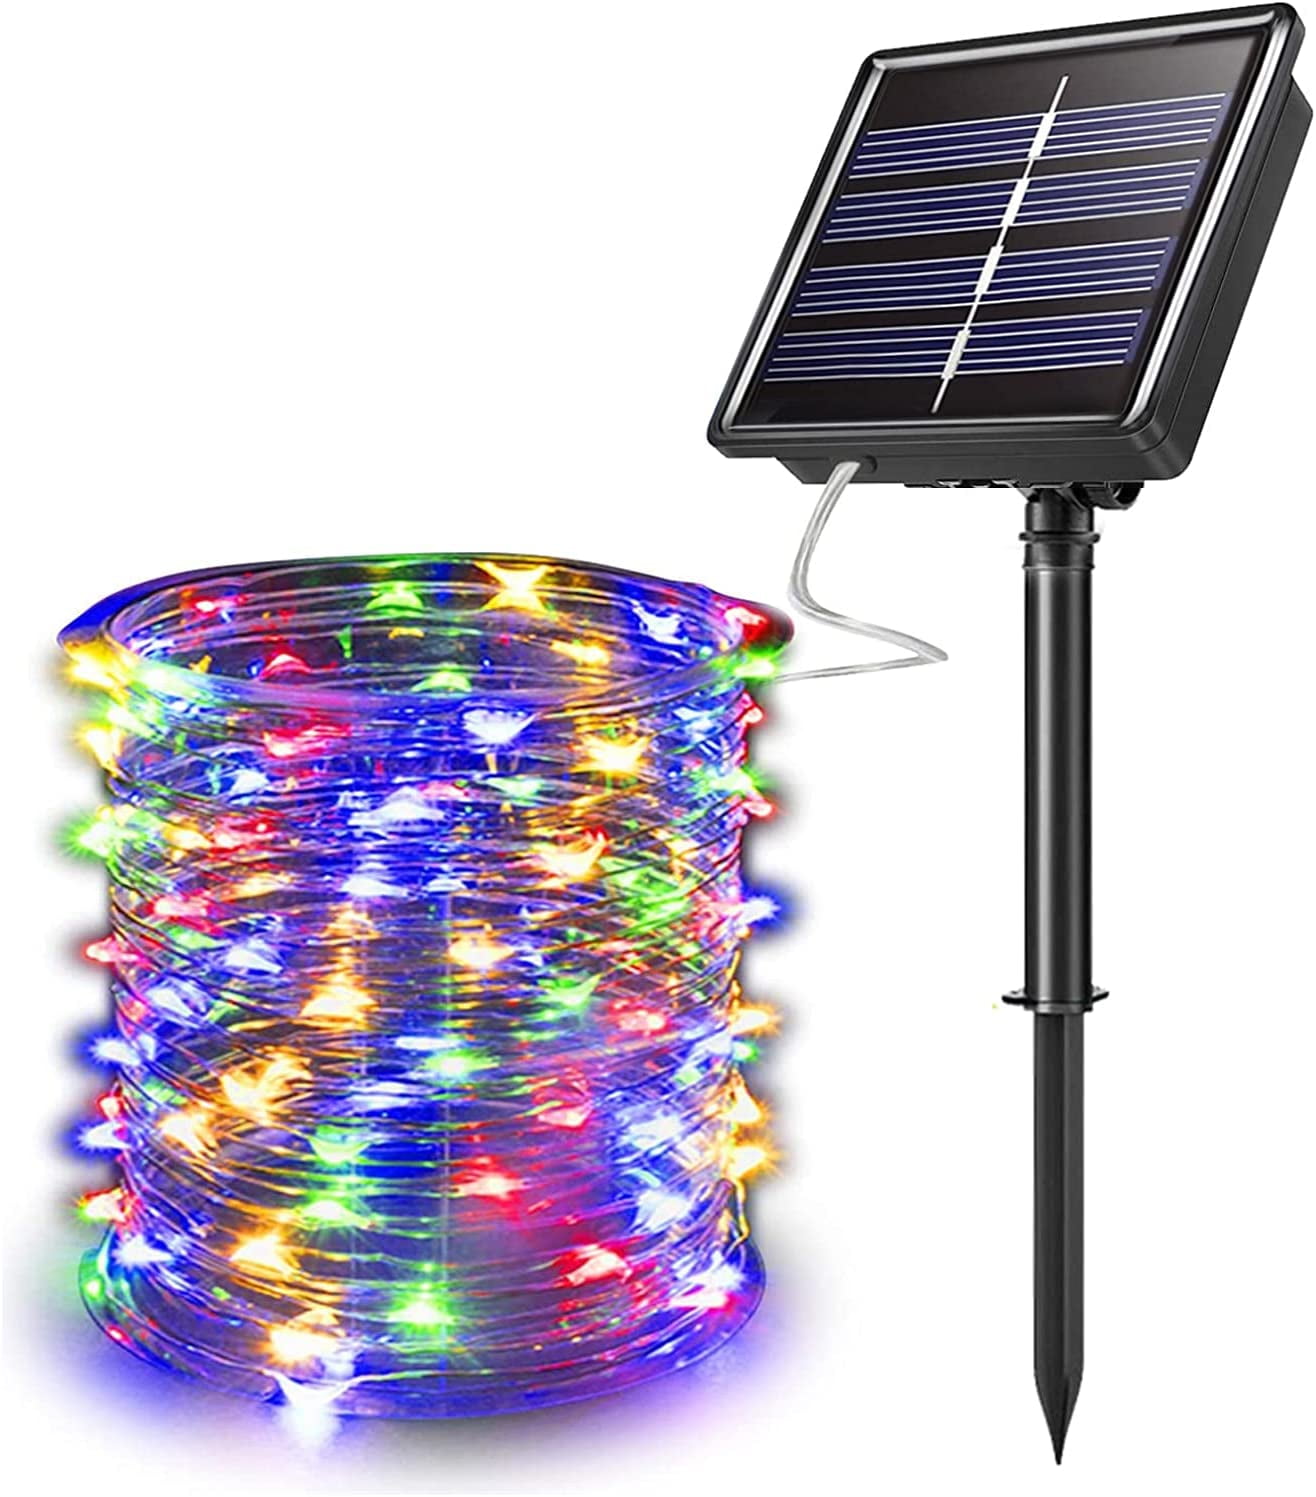 Solar Rope String Lights Outdoor 72FT 200 LED Waterproof Solar Powered Fairy 8 1 